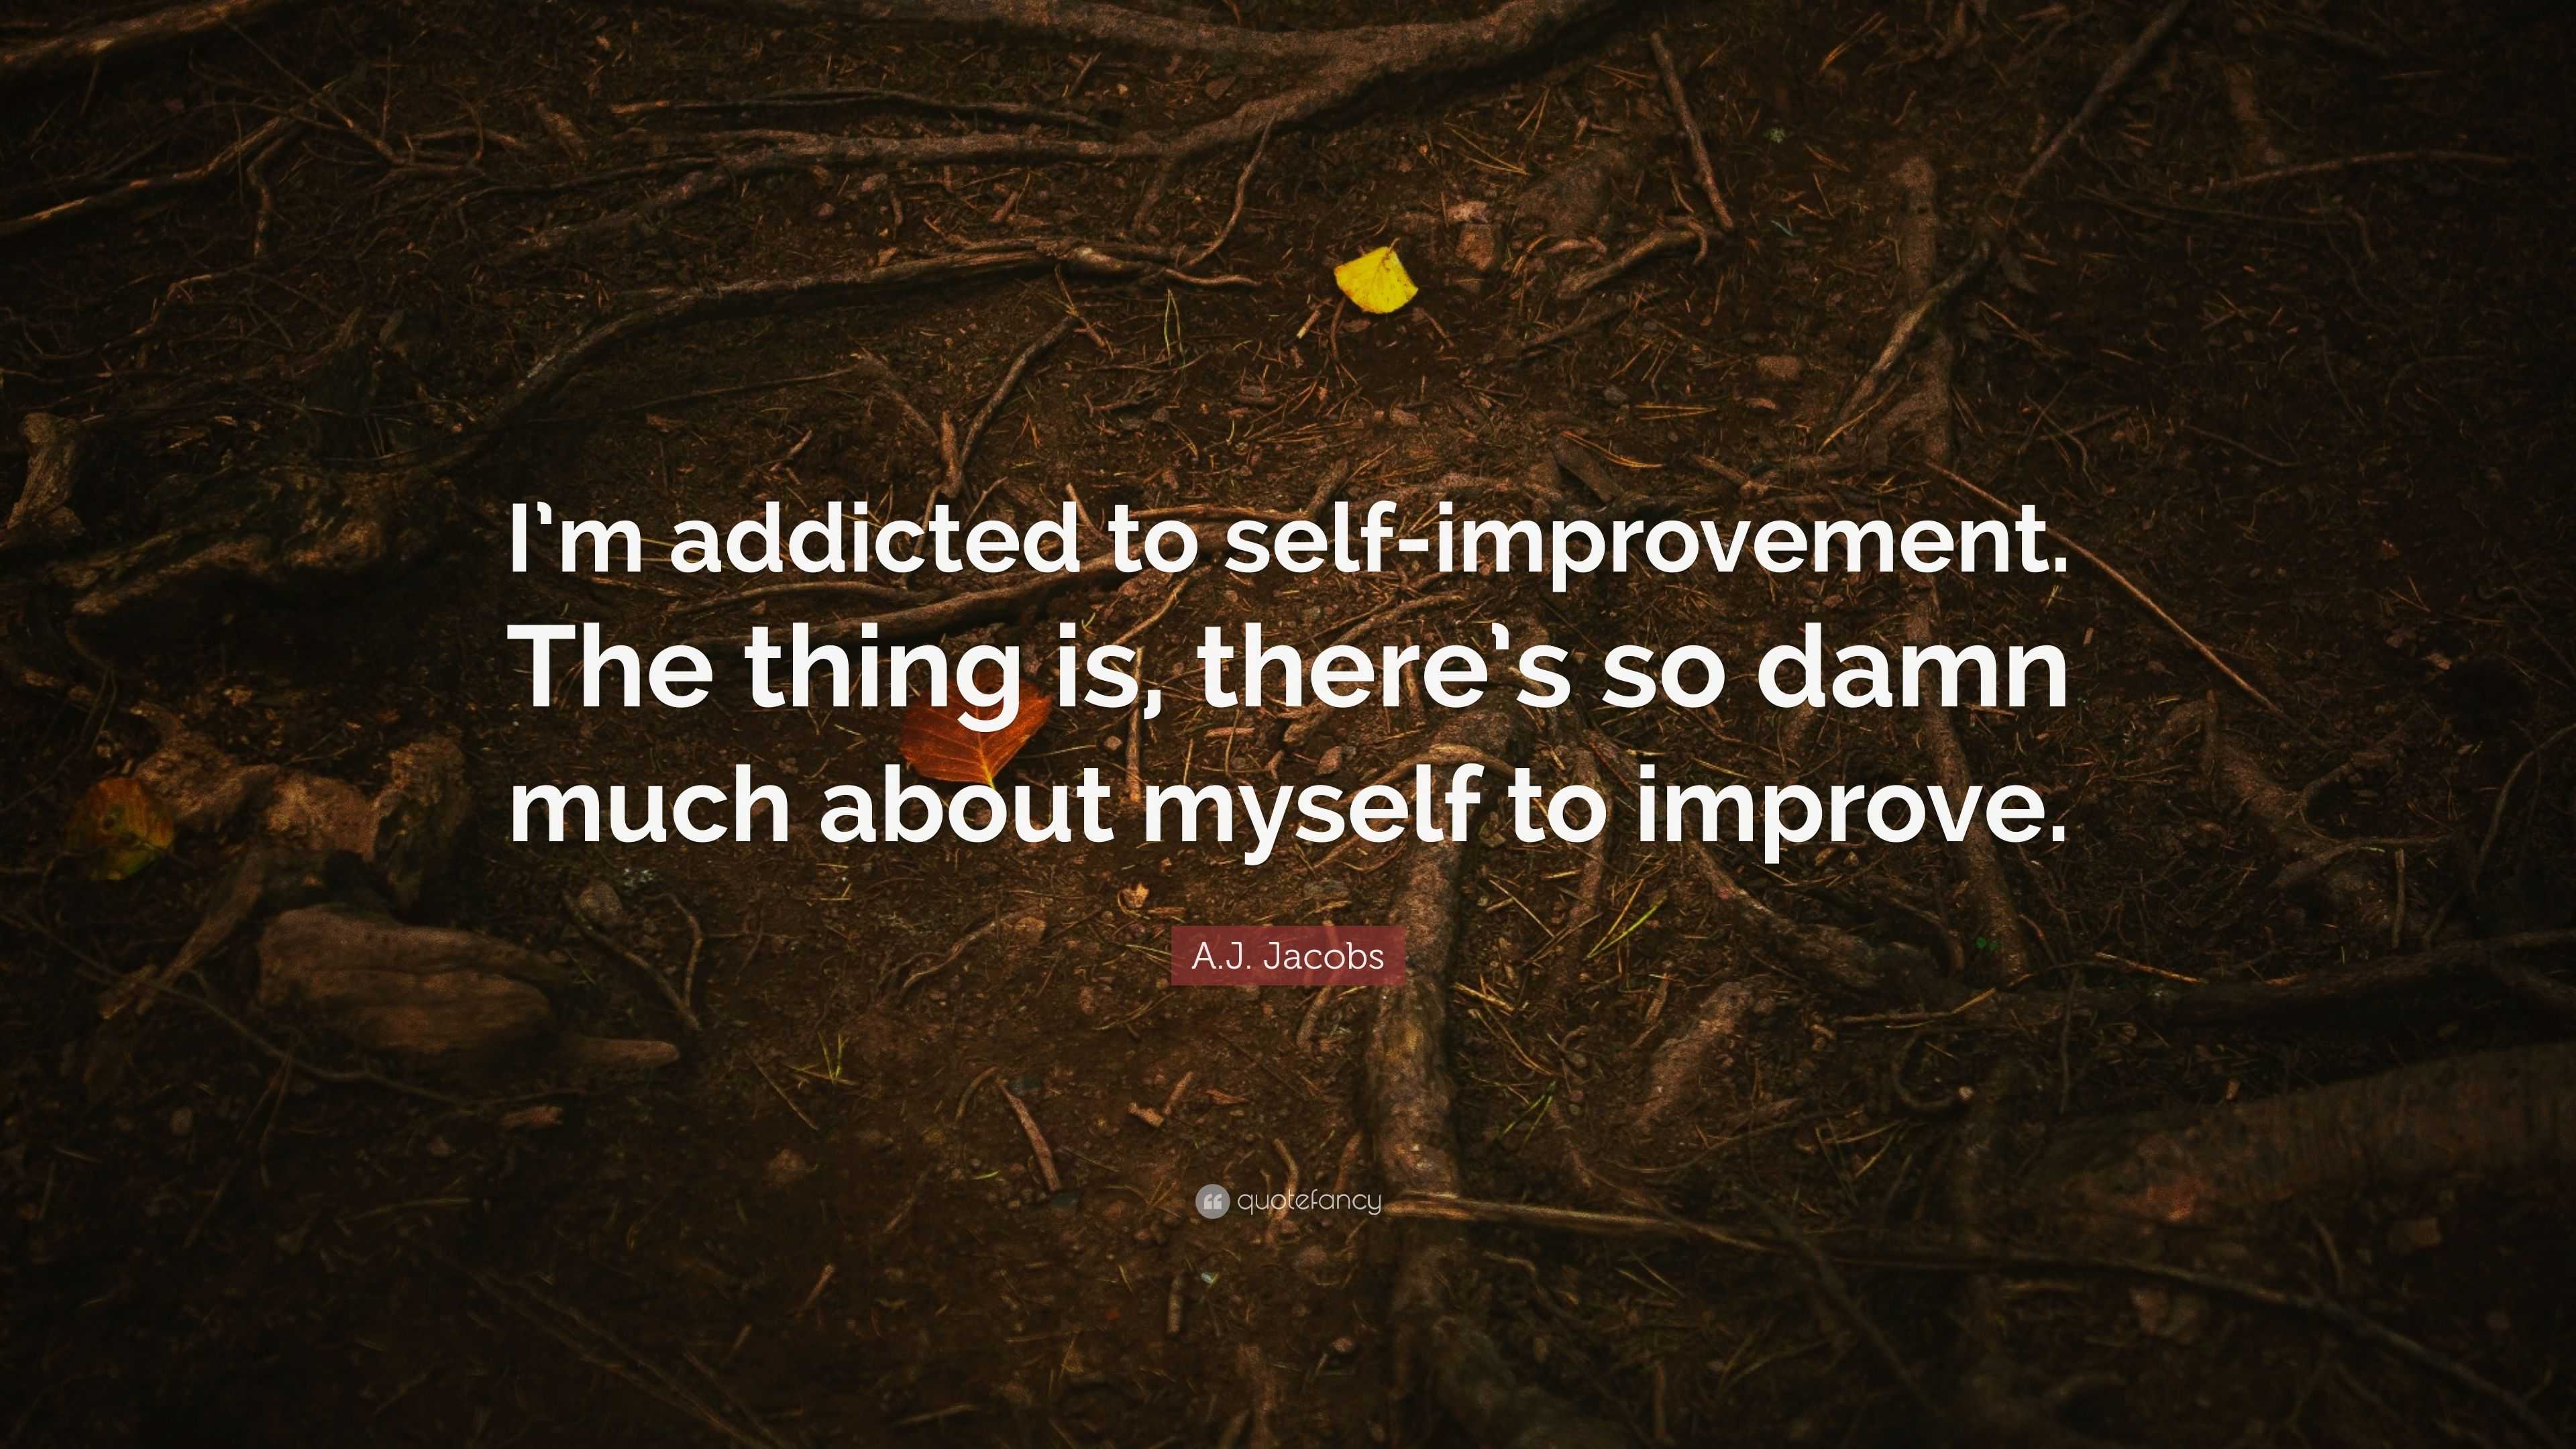 A.J. Jacobs Quote: “I’m addicted to self-improvement. The thing is